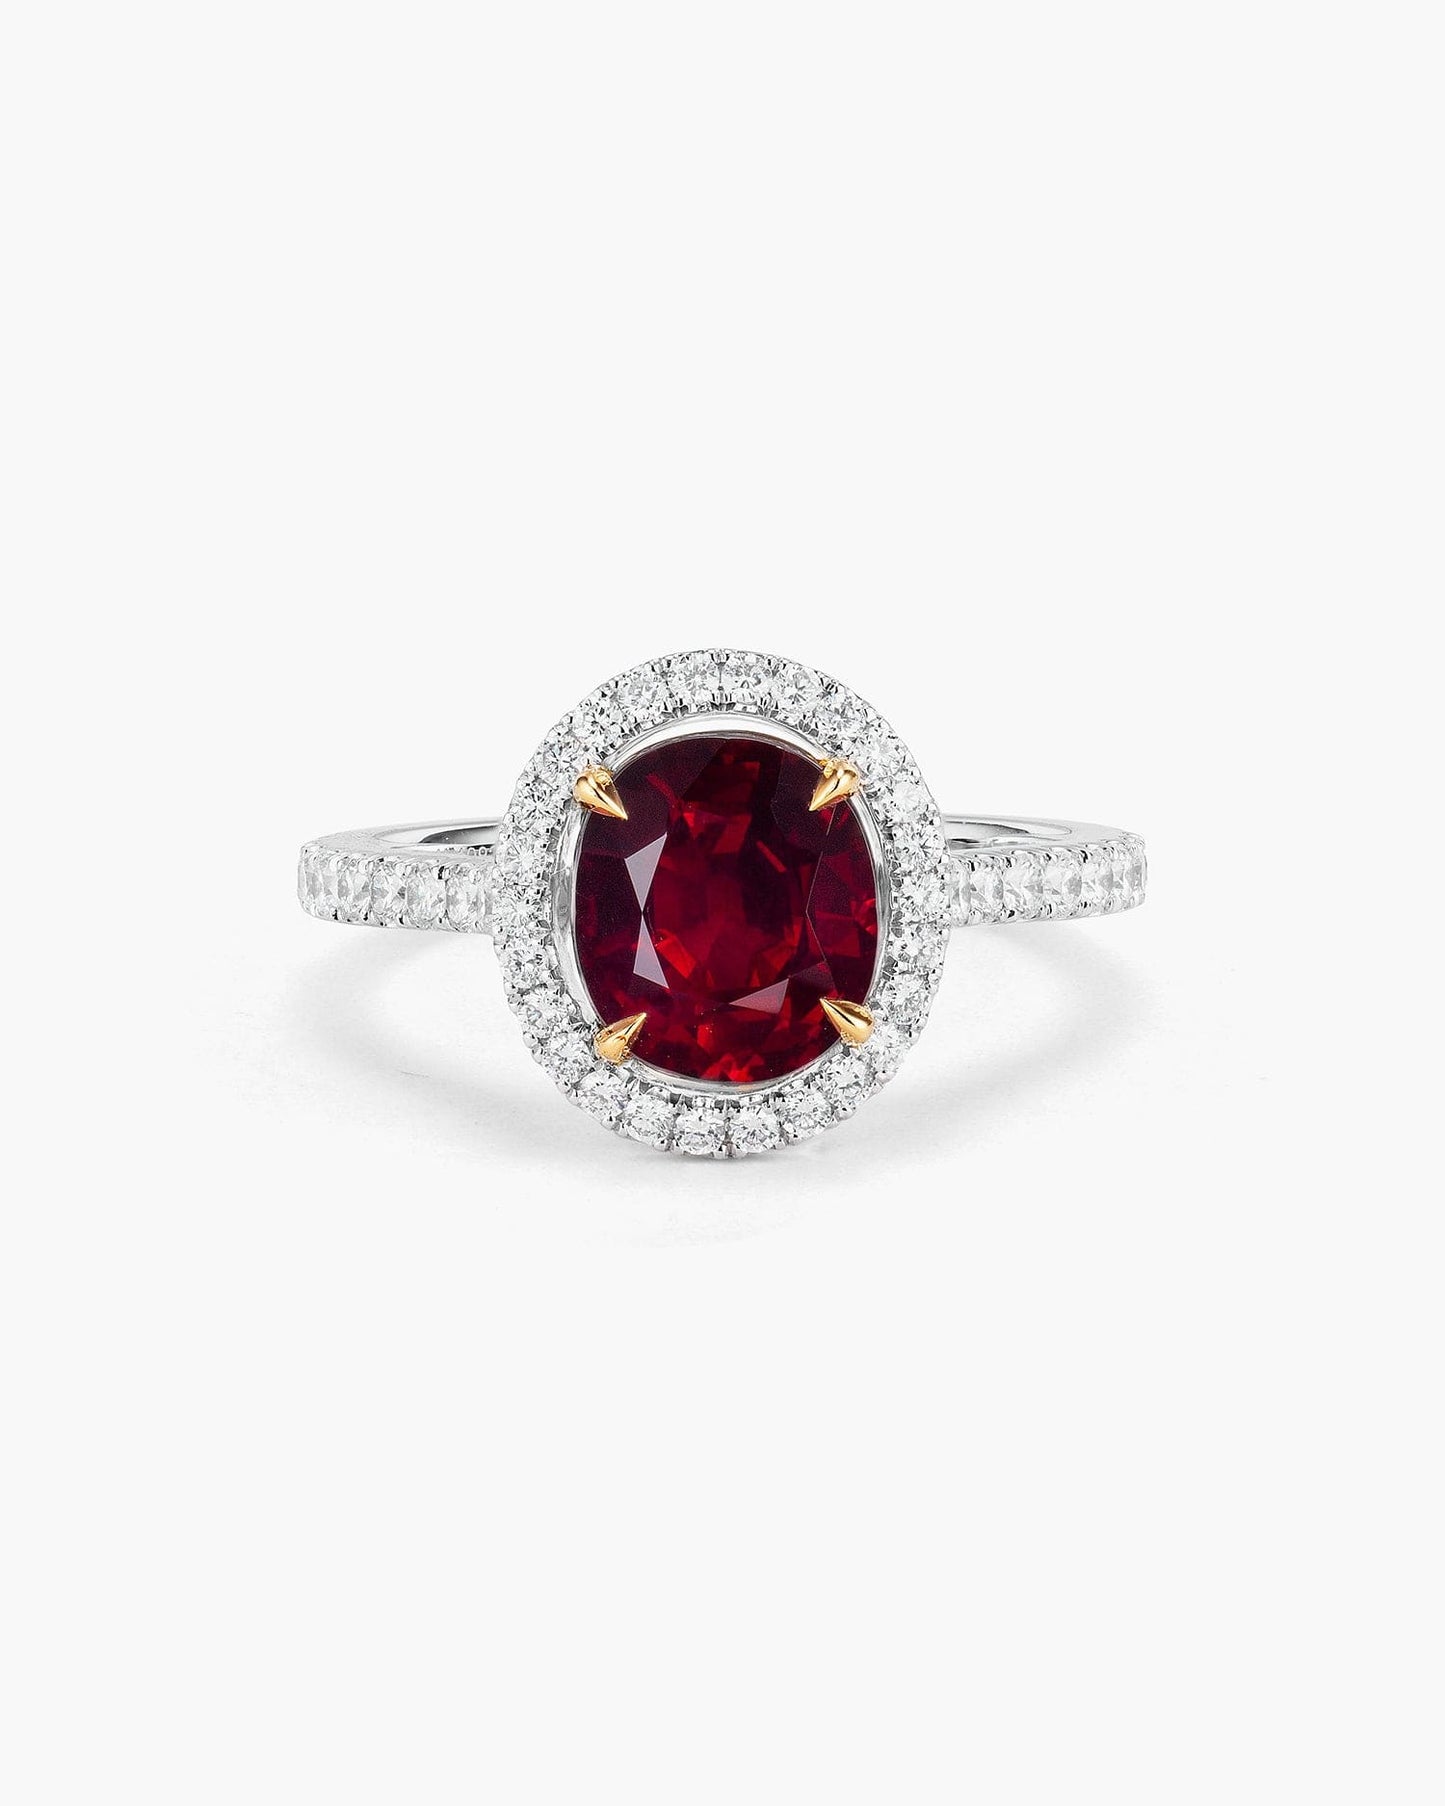 2.26 carat Oval Shape Mozambique Ruby and Diamond Ring